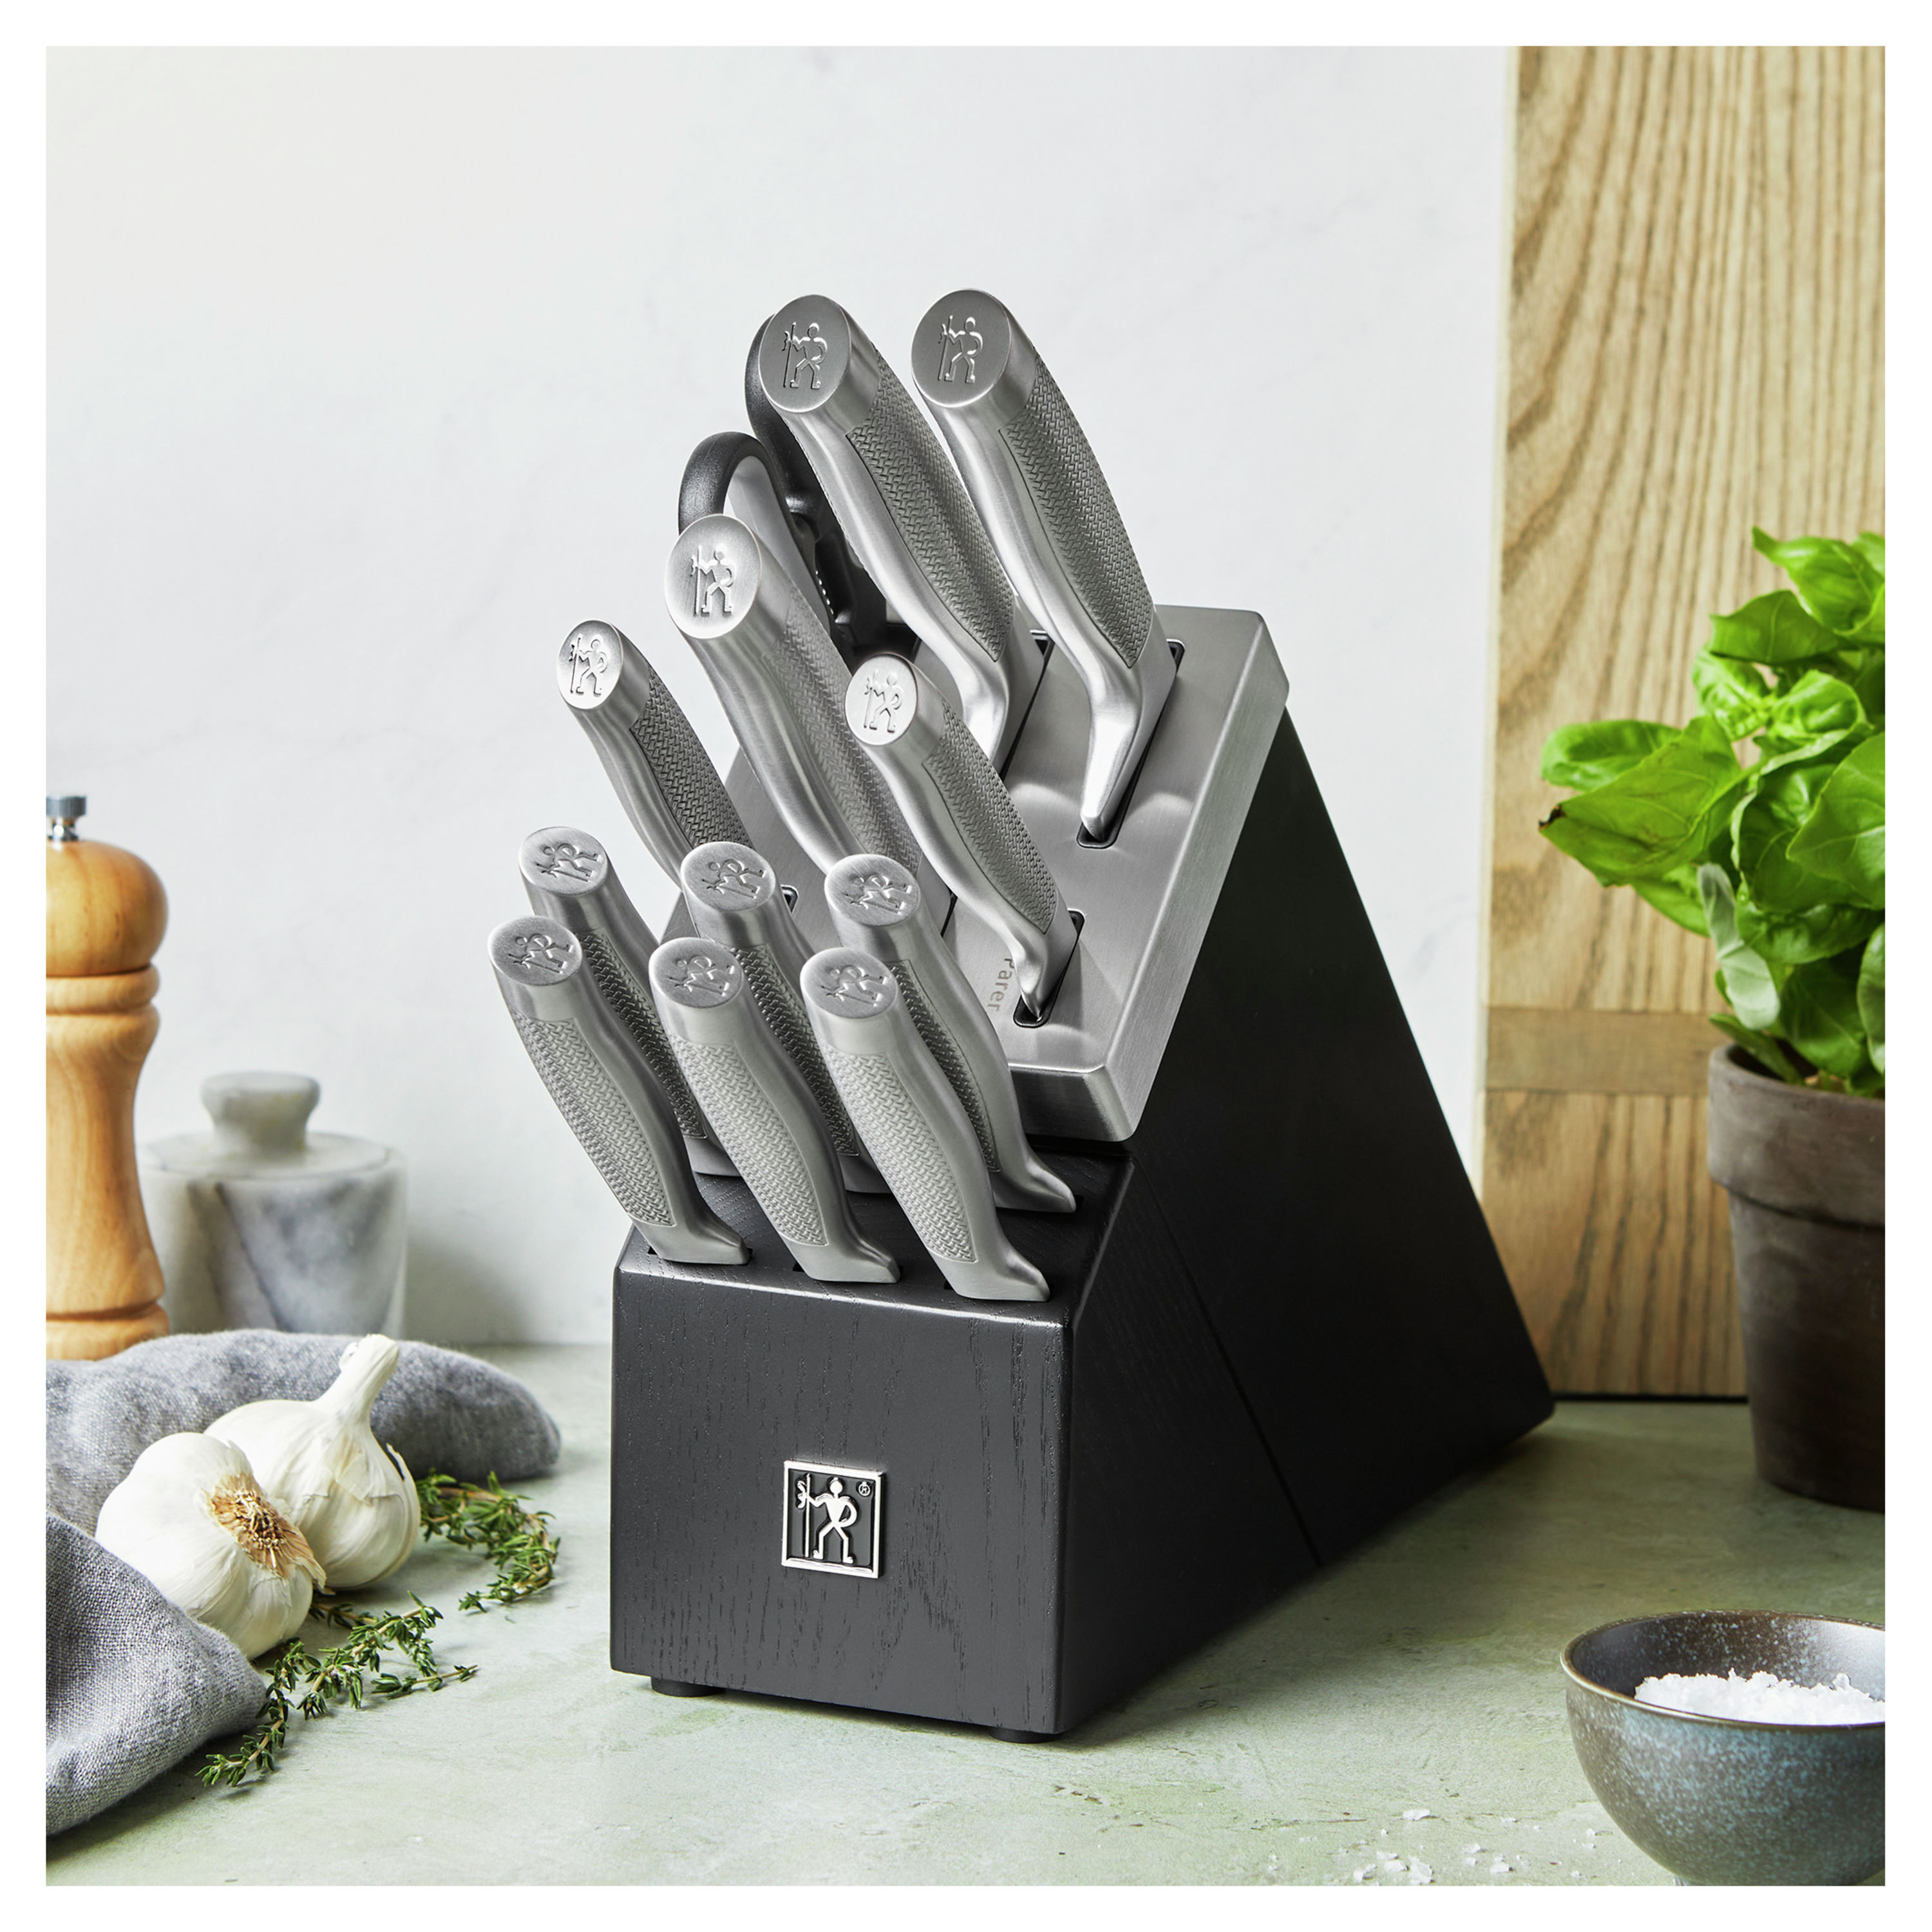 Henckels Forged Synergy 13-piece Knife Block Set & Reviews